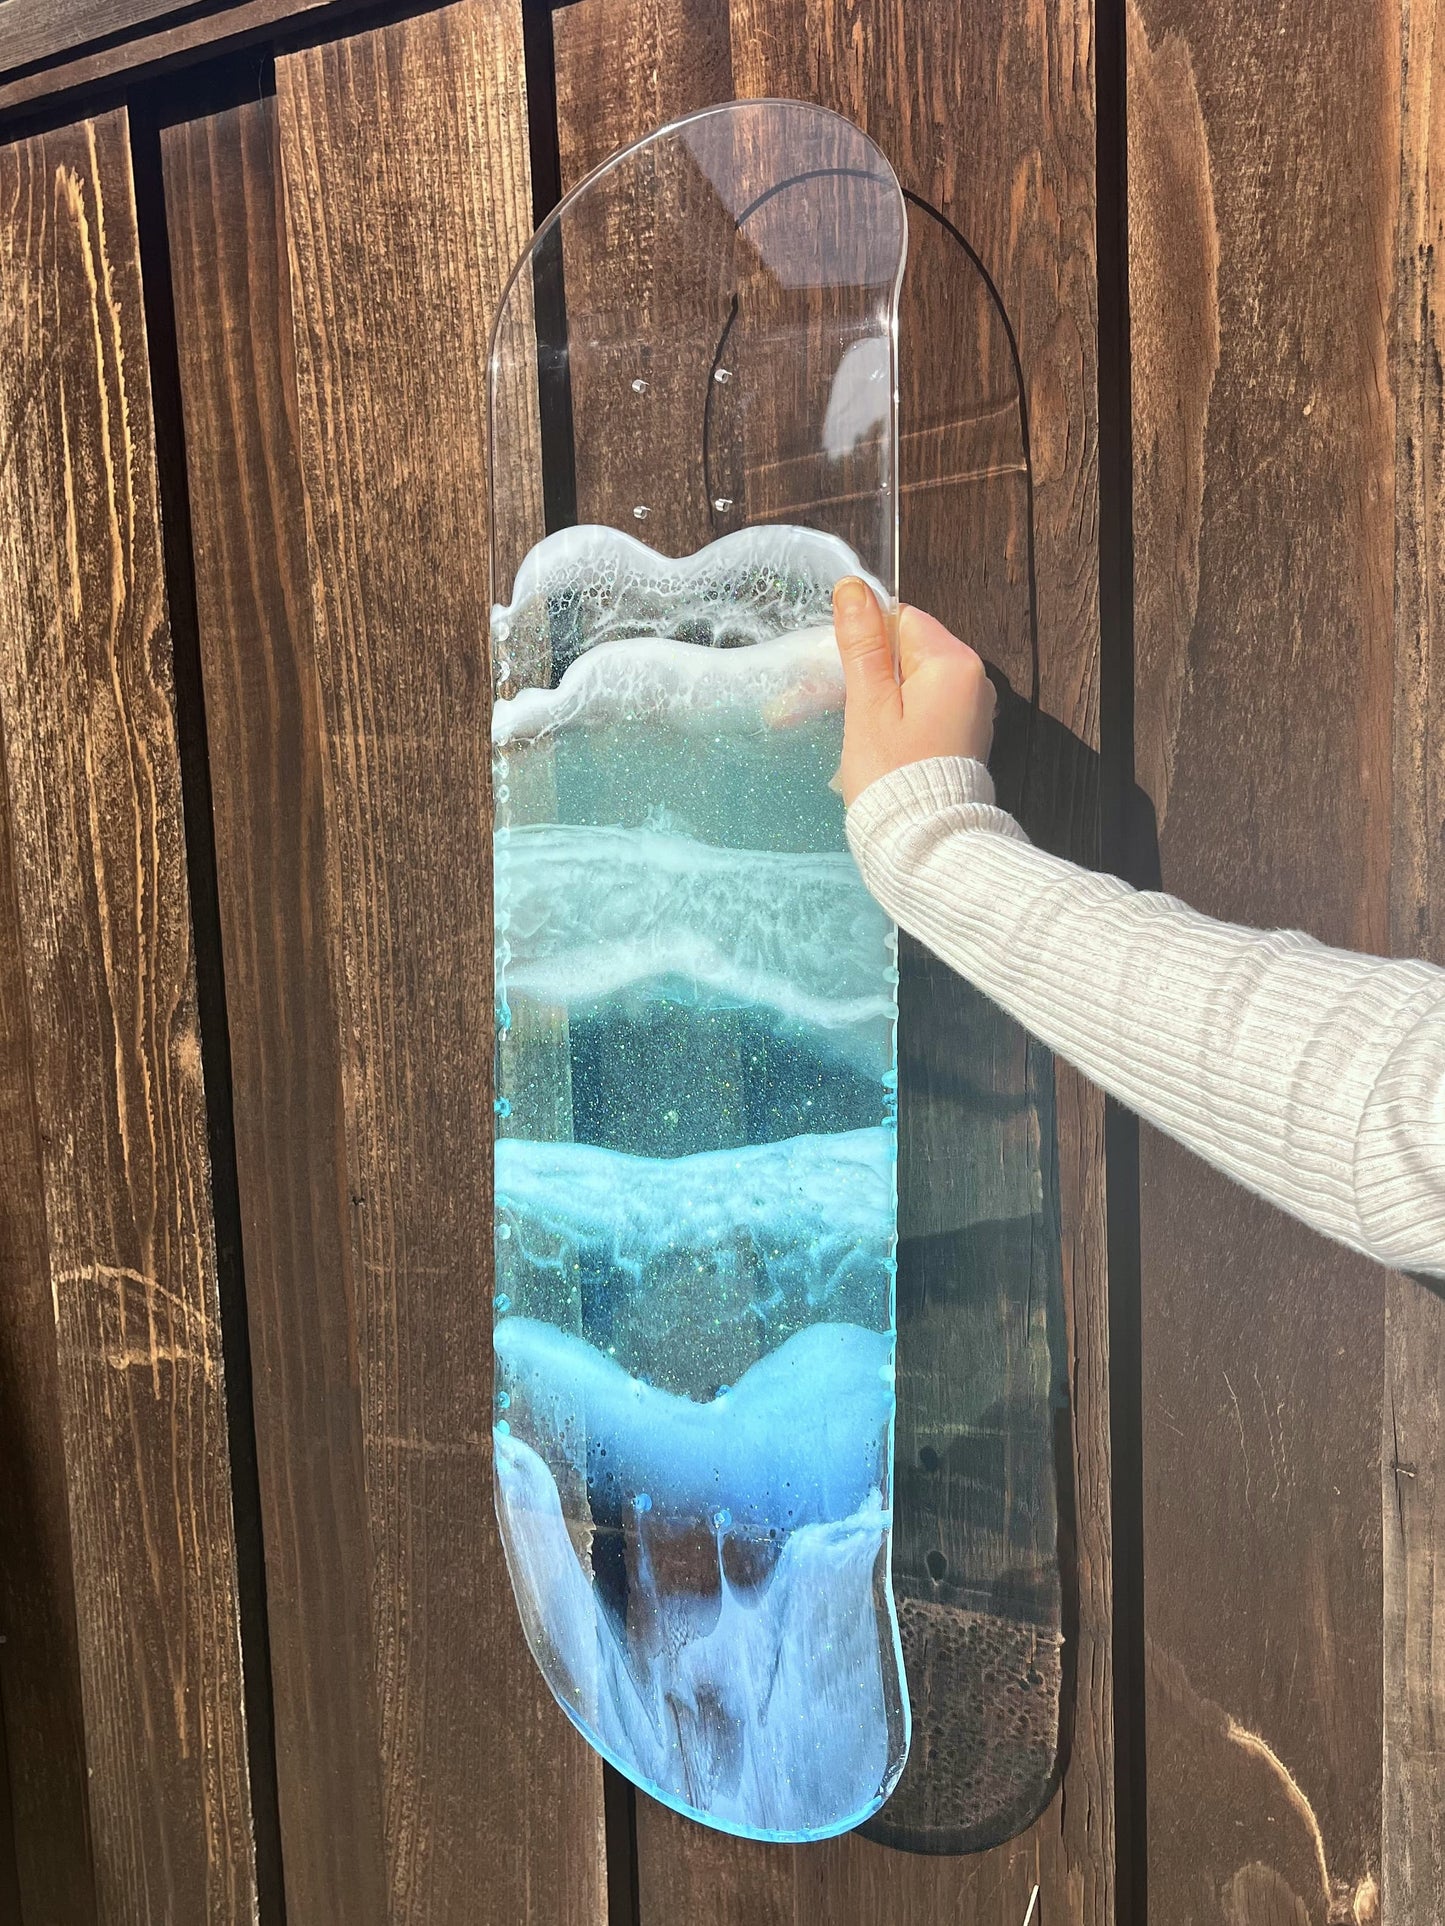 Woman holding see-through skateboard deck with blue ocean wave resin artwork against wooden backdrop.